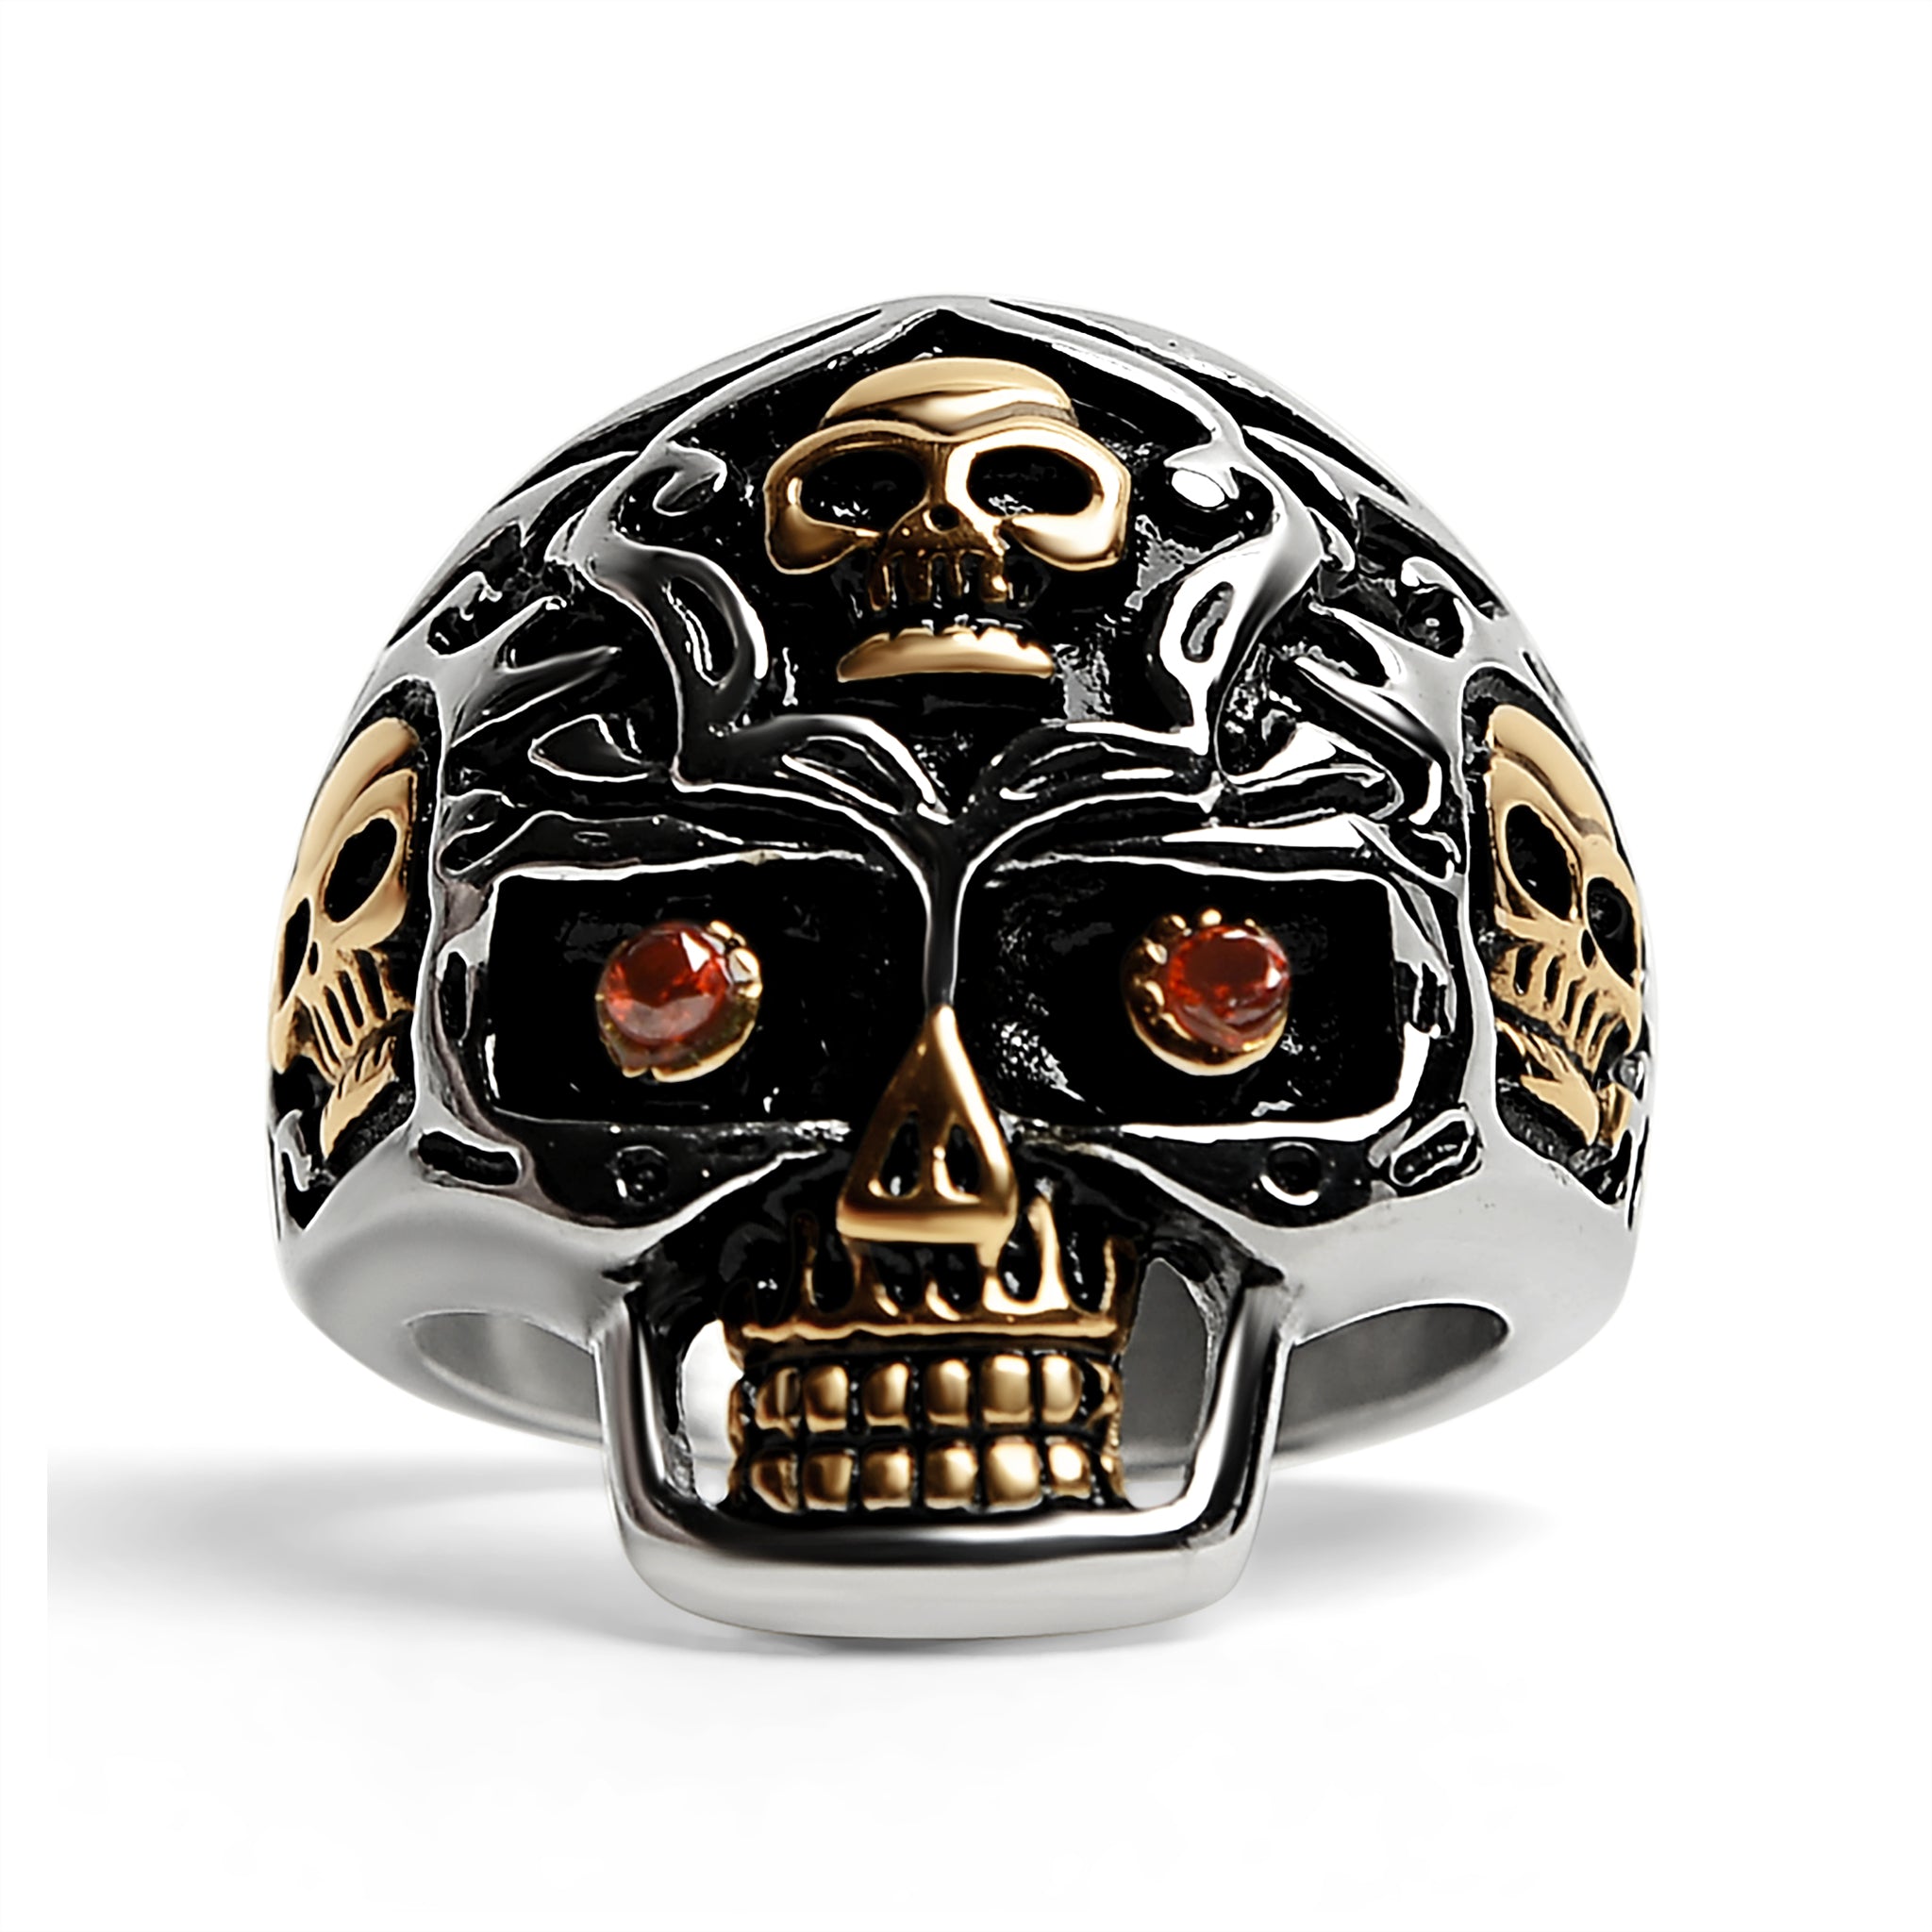 Stainless Steel Red CZ Filigree Skull Ring - 18K Gold PVD Coated, Durable, Hypoallergenic, 21g Weight - Jewelry & Watches - Bijou Her -  -  - 